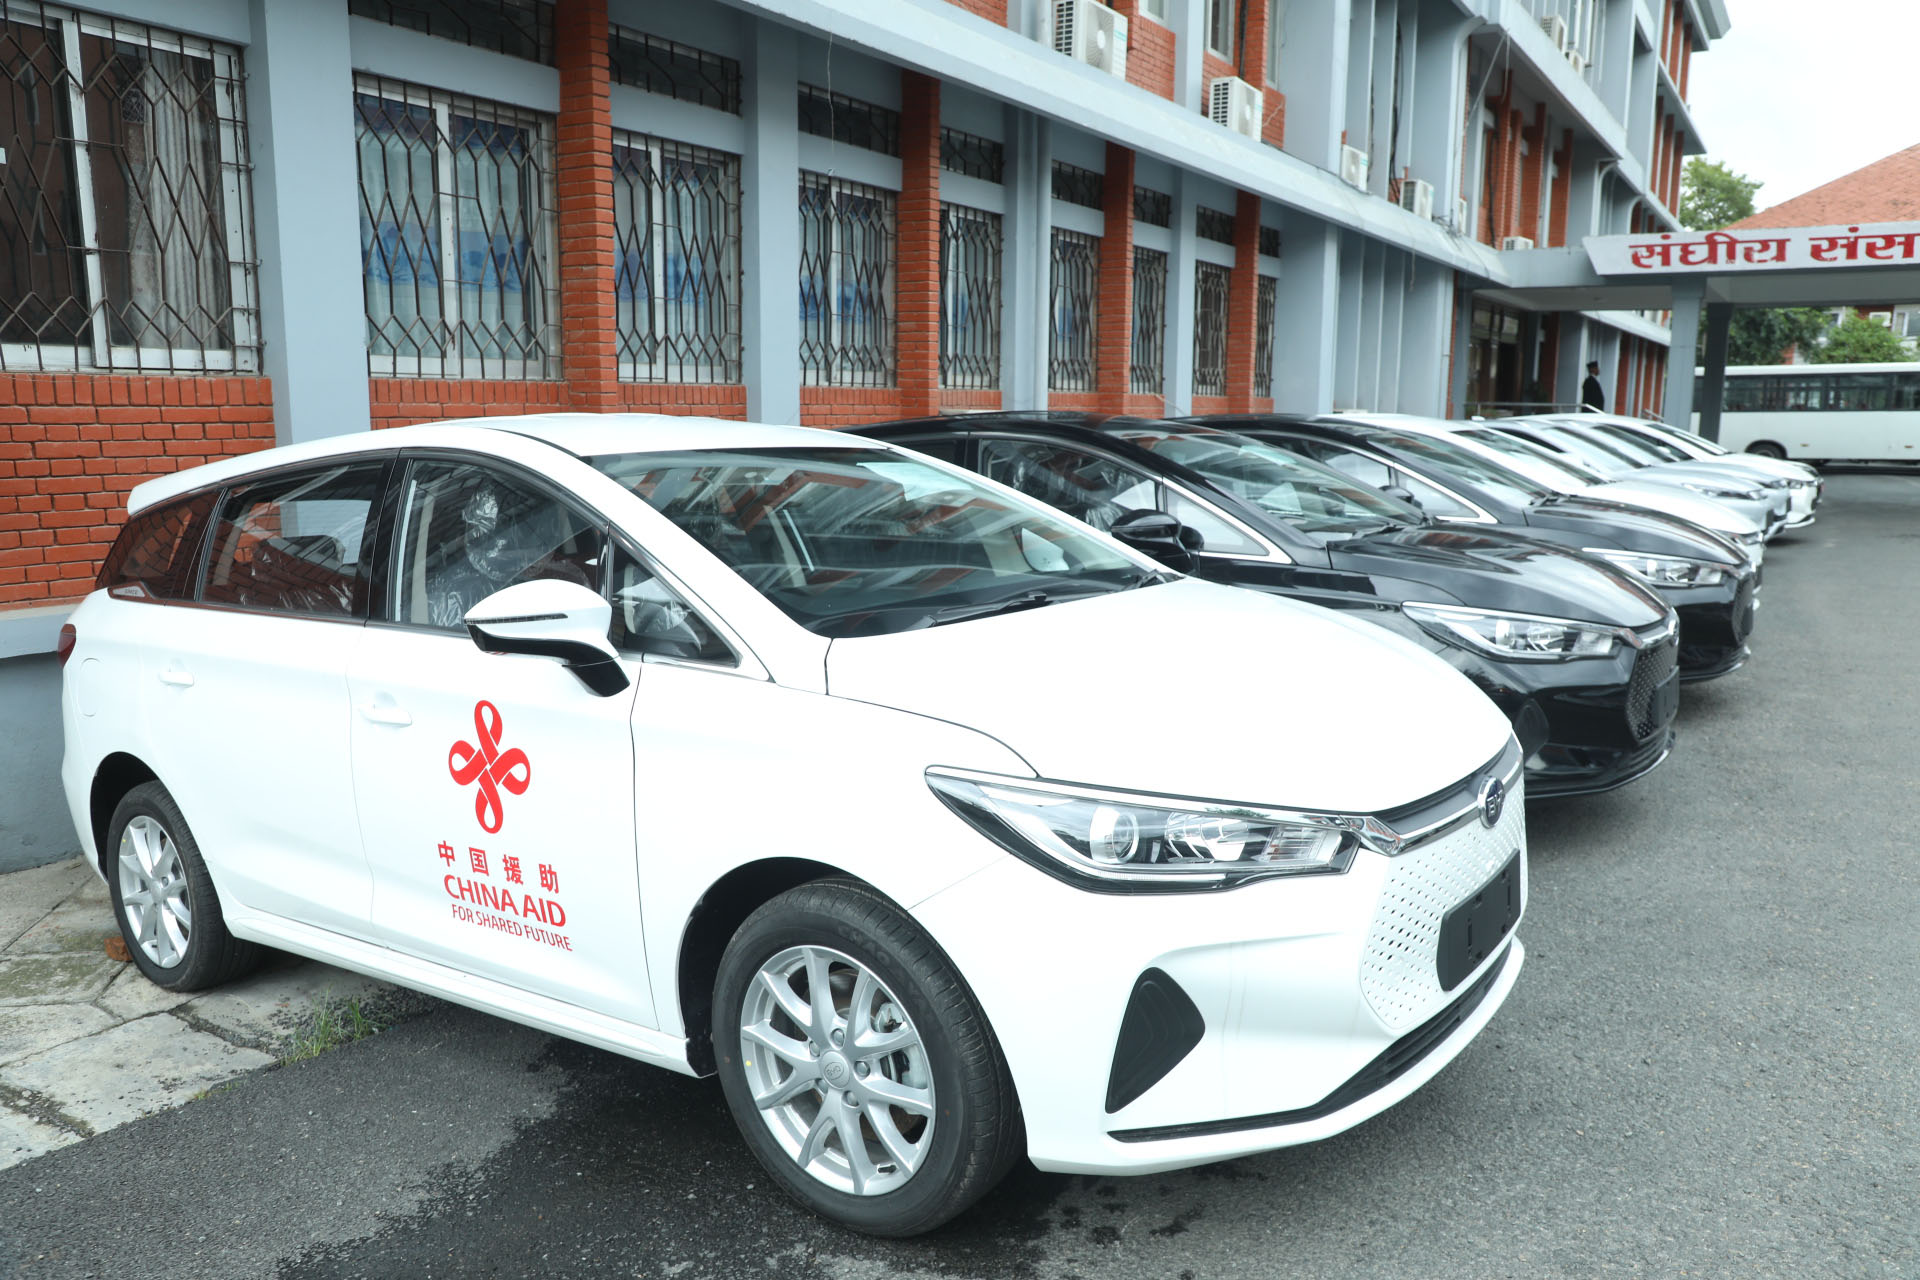 Revving up diplomacy: China unleashes fleet of vehicles as gift to Federal Parliament